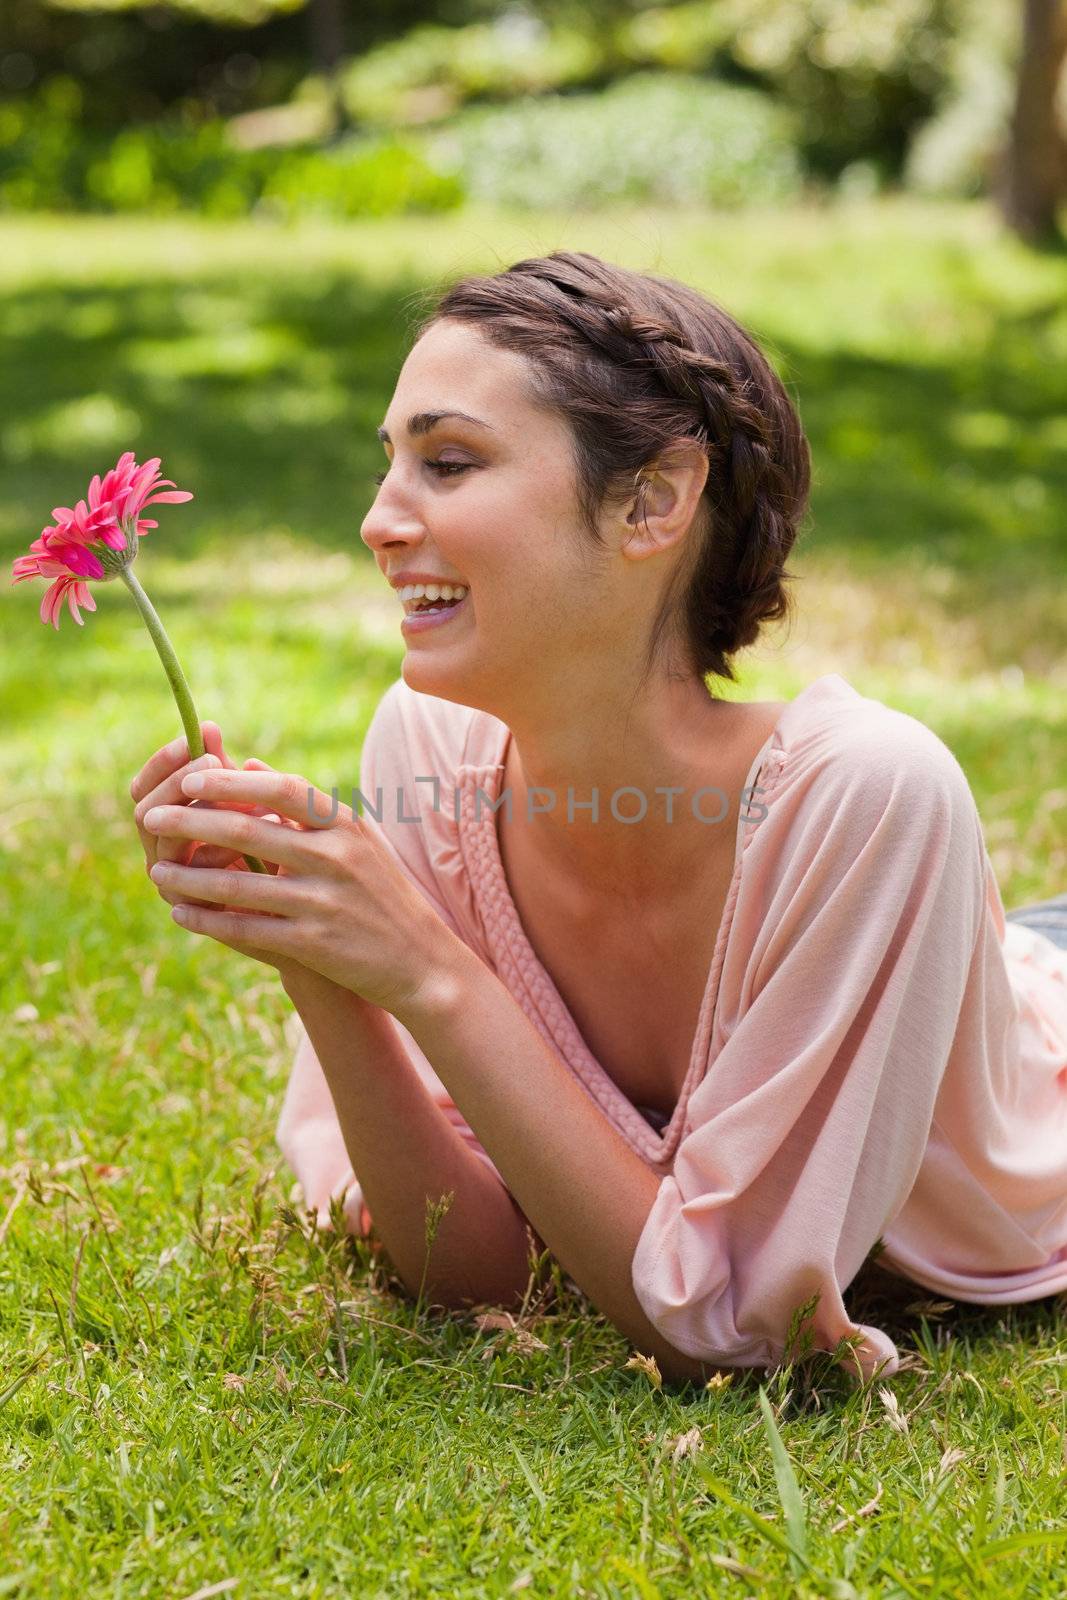 Young woman lying on her front laughing while looking at a flower which is being held in her hand